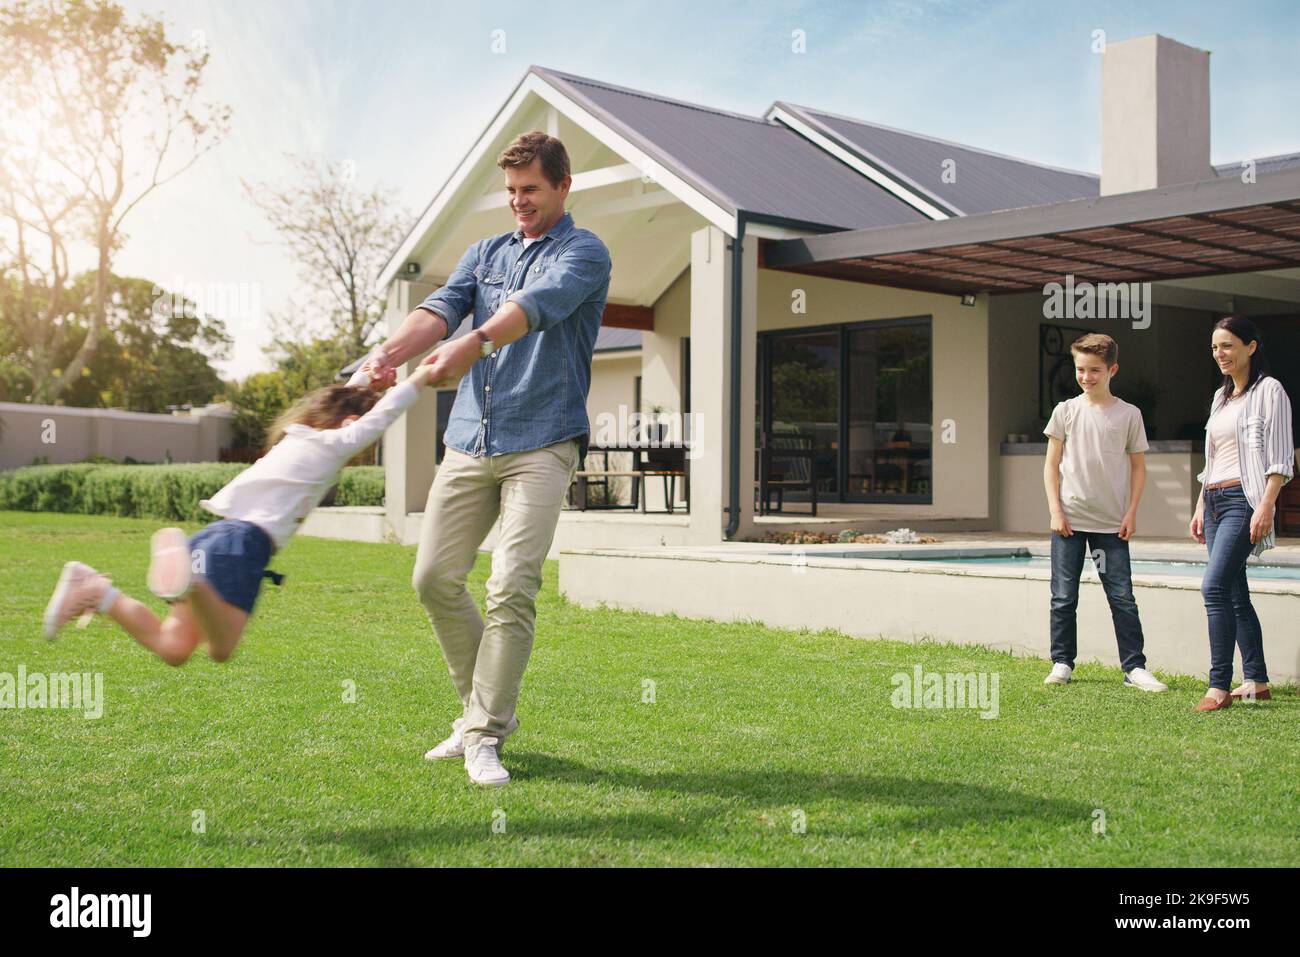 Domestic bliss at its best. a happy young family playing together in their front yard. Stock Photo